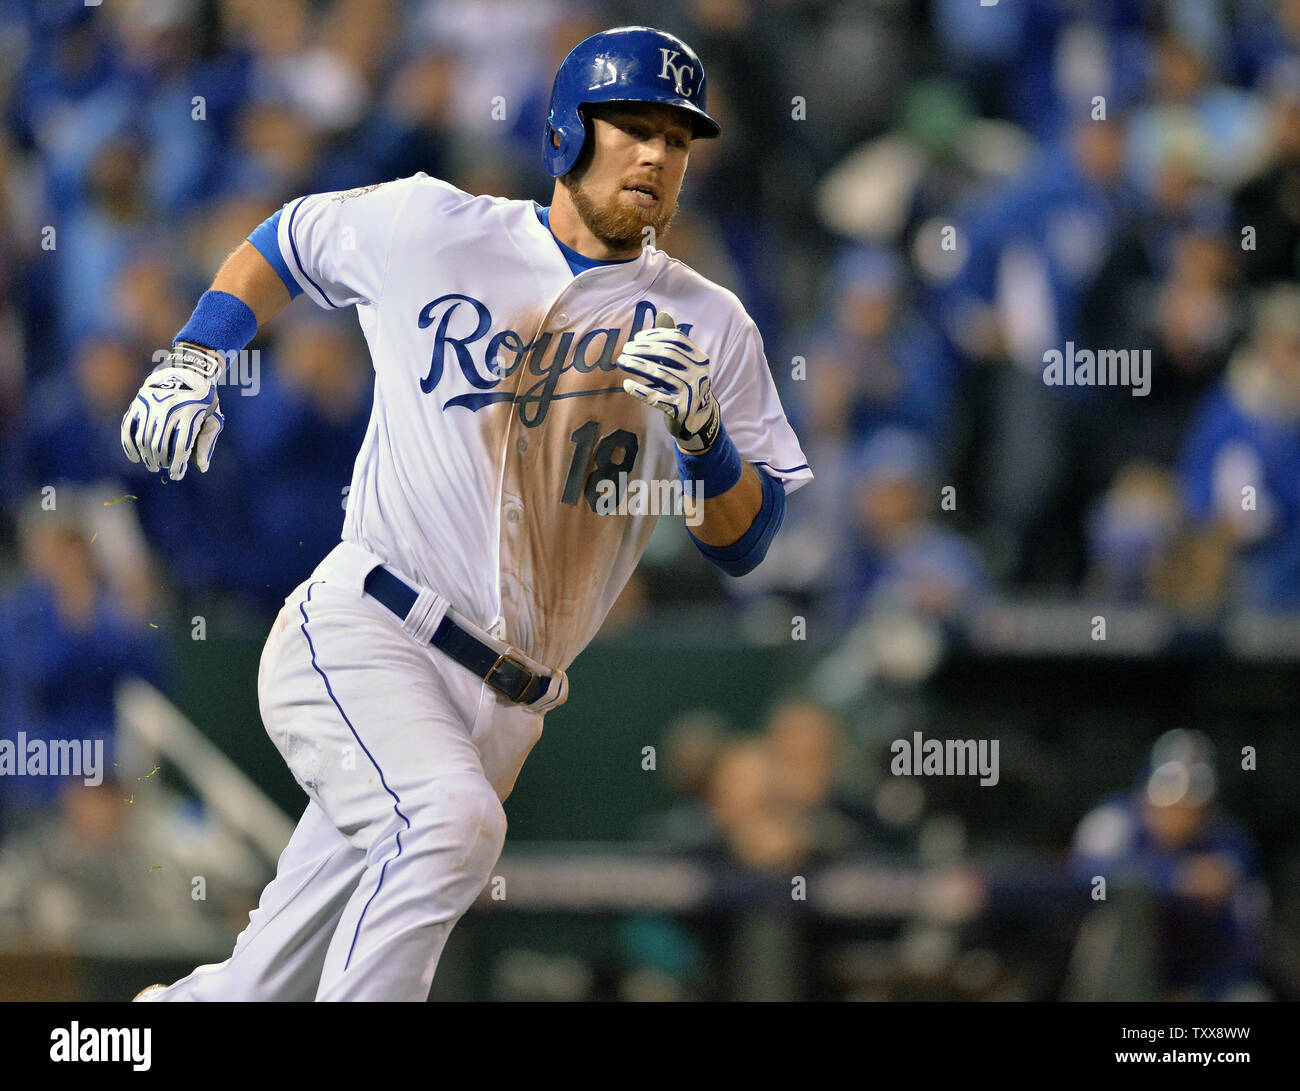 Kansas City Royals Ben Zobrist doubles against the New York Mets during the  sixth inning of game 1 of the World Series at Kauffman Stadium in Kansas  City, Missouri on October 27